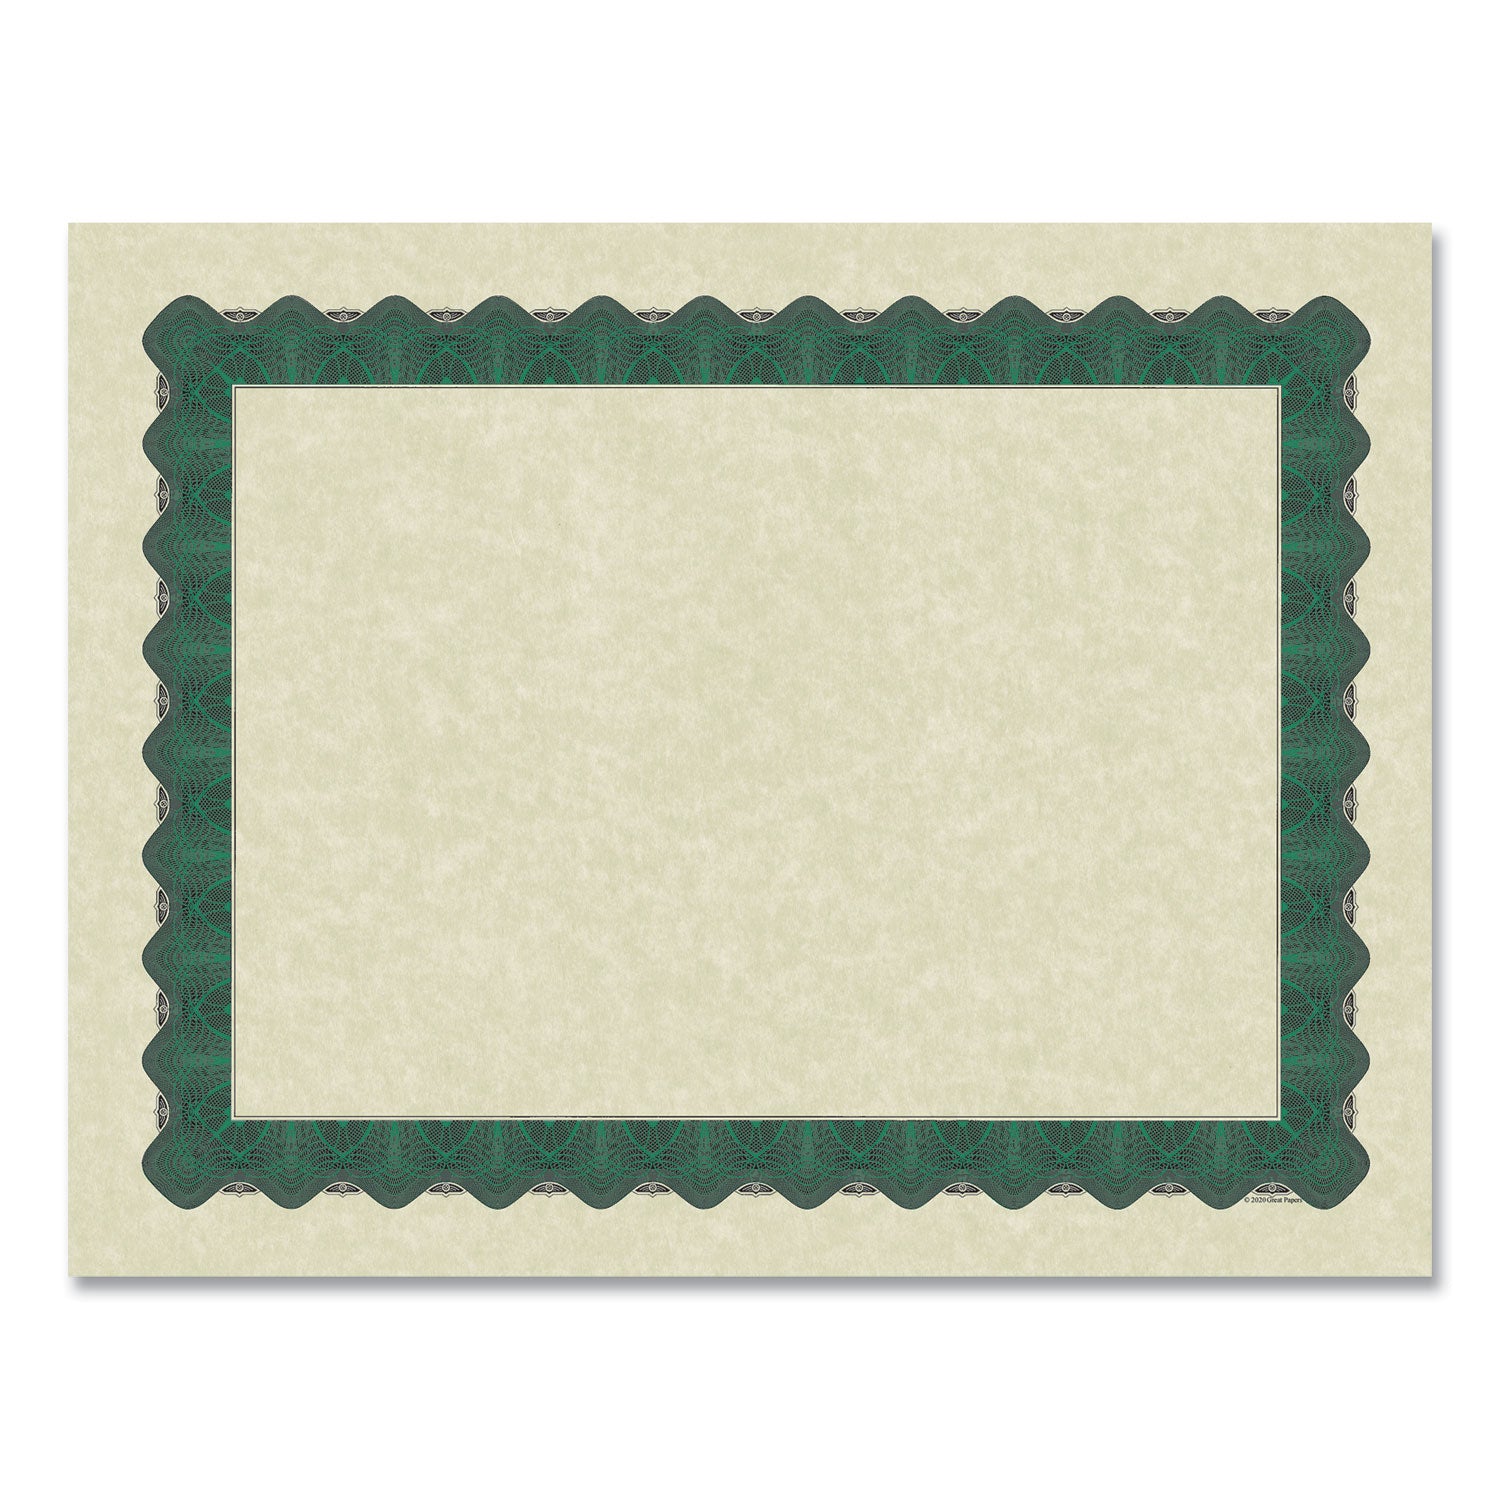 metallic-border-certificates-11-x-85-ivory-green-with-green-border-100-pack_grp934200 - 2